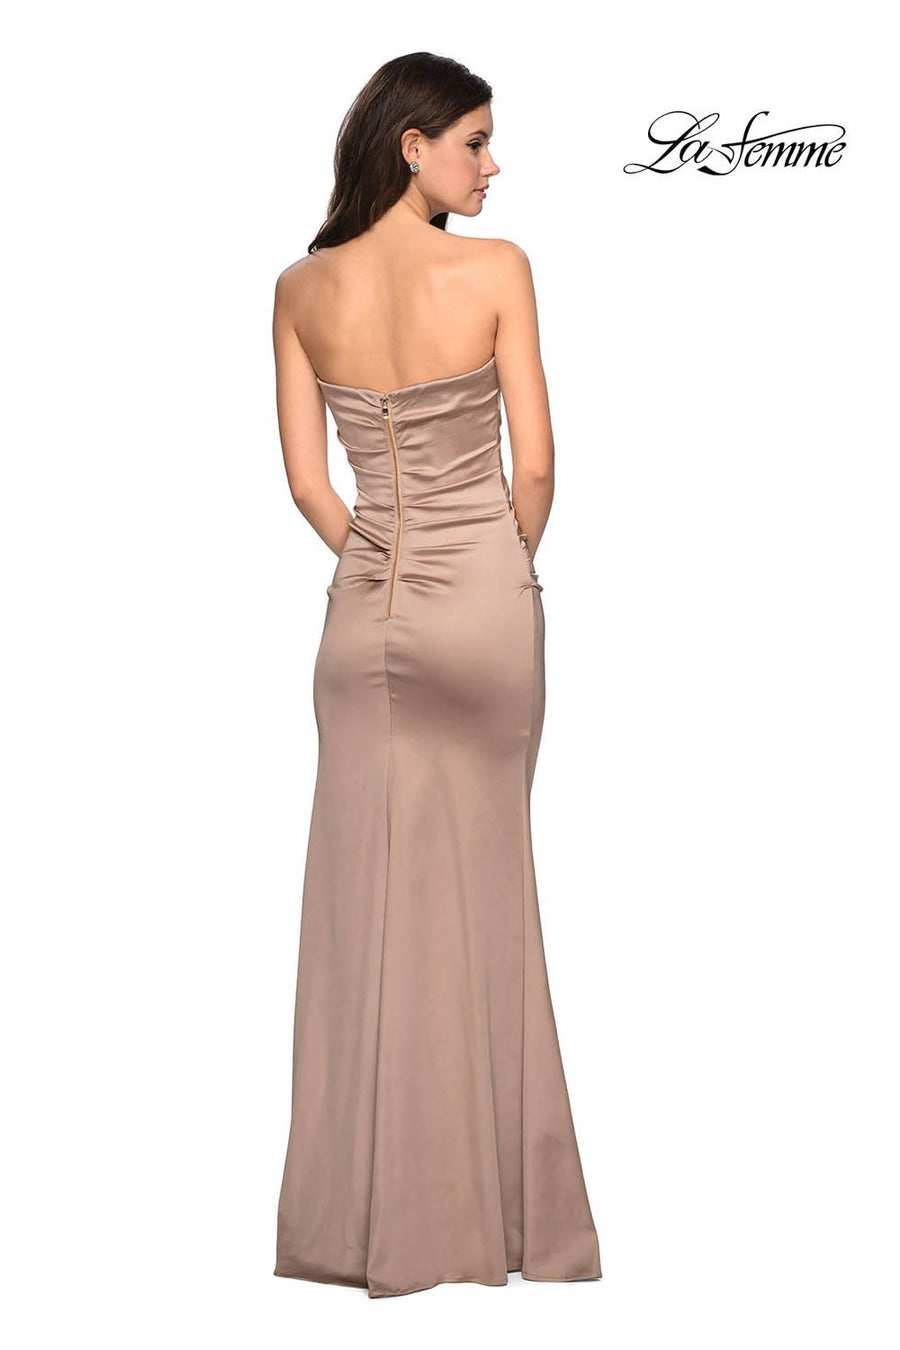 La Femme 27780 prom dress images.  La Femme 27780 is available in these colors: Forest Green, Fuchsia, Gold.